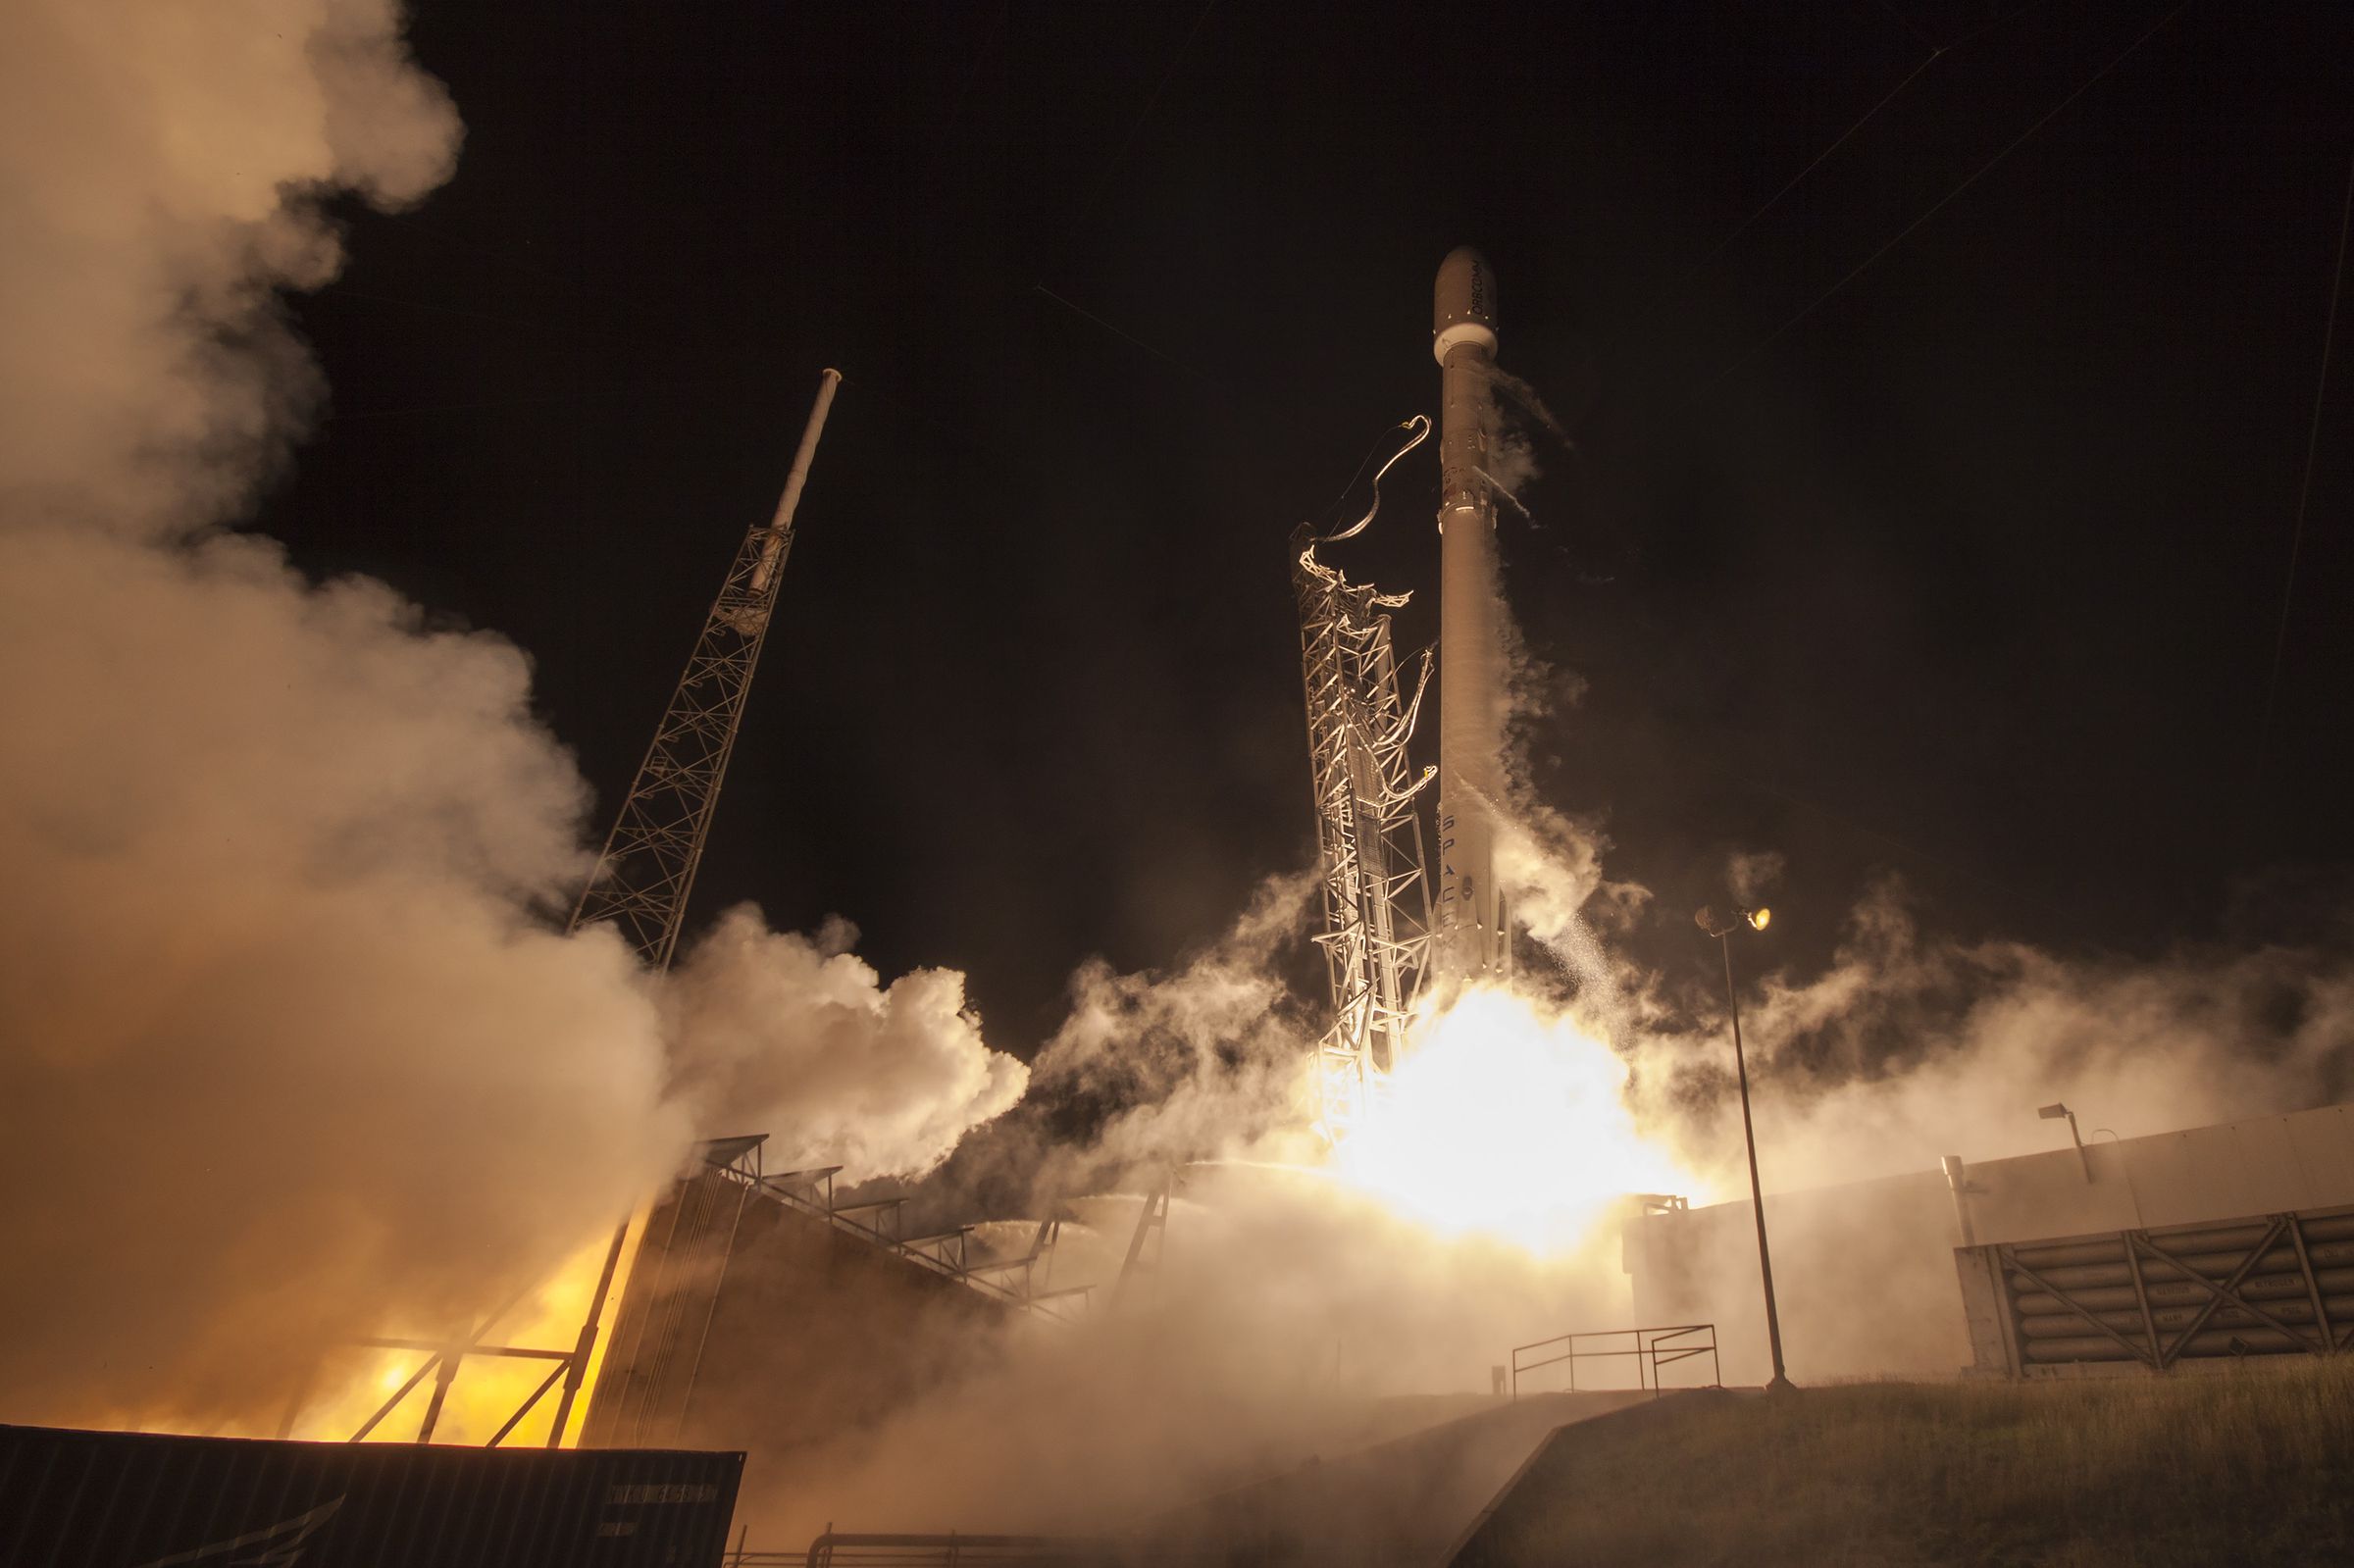 SpaceX Falcon 9 launch and landing photos